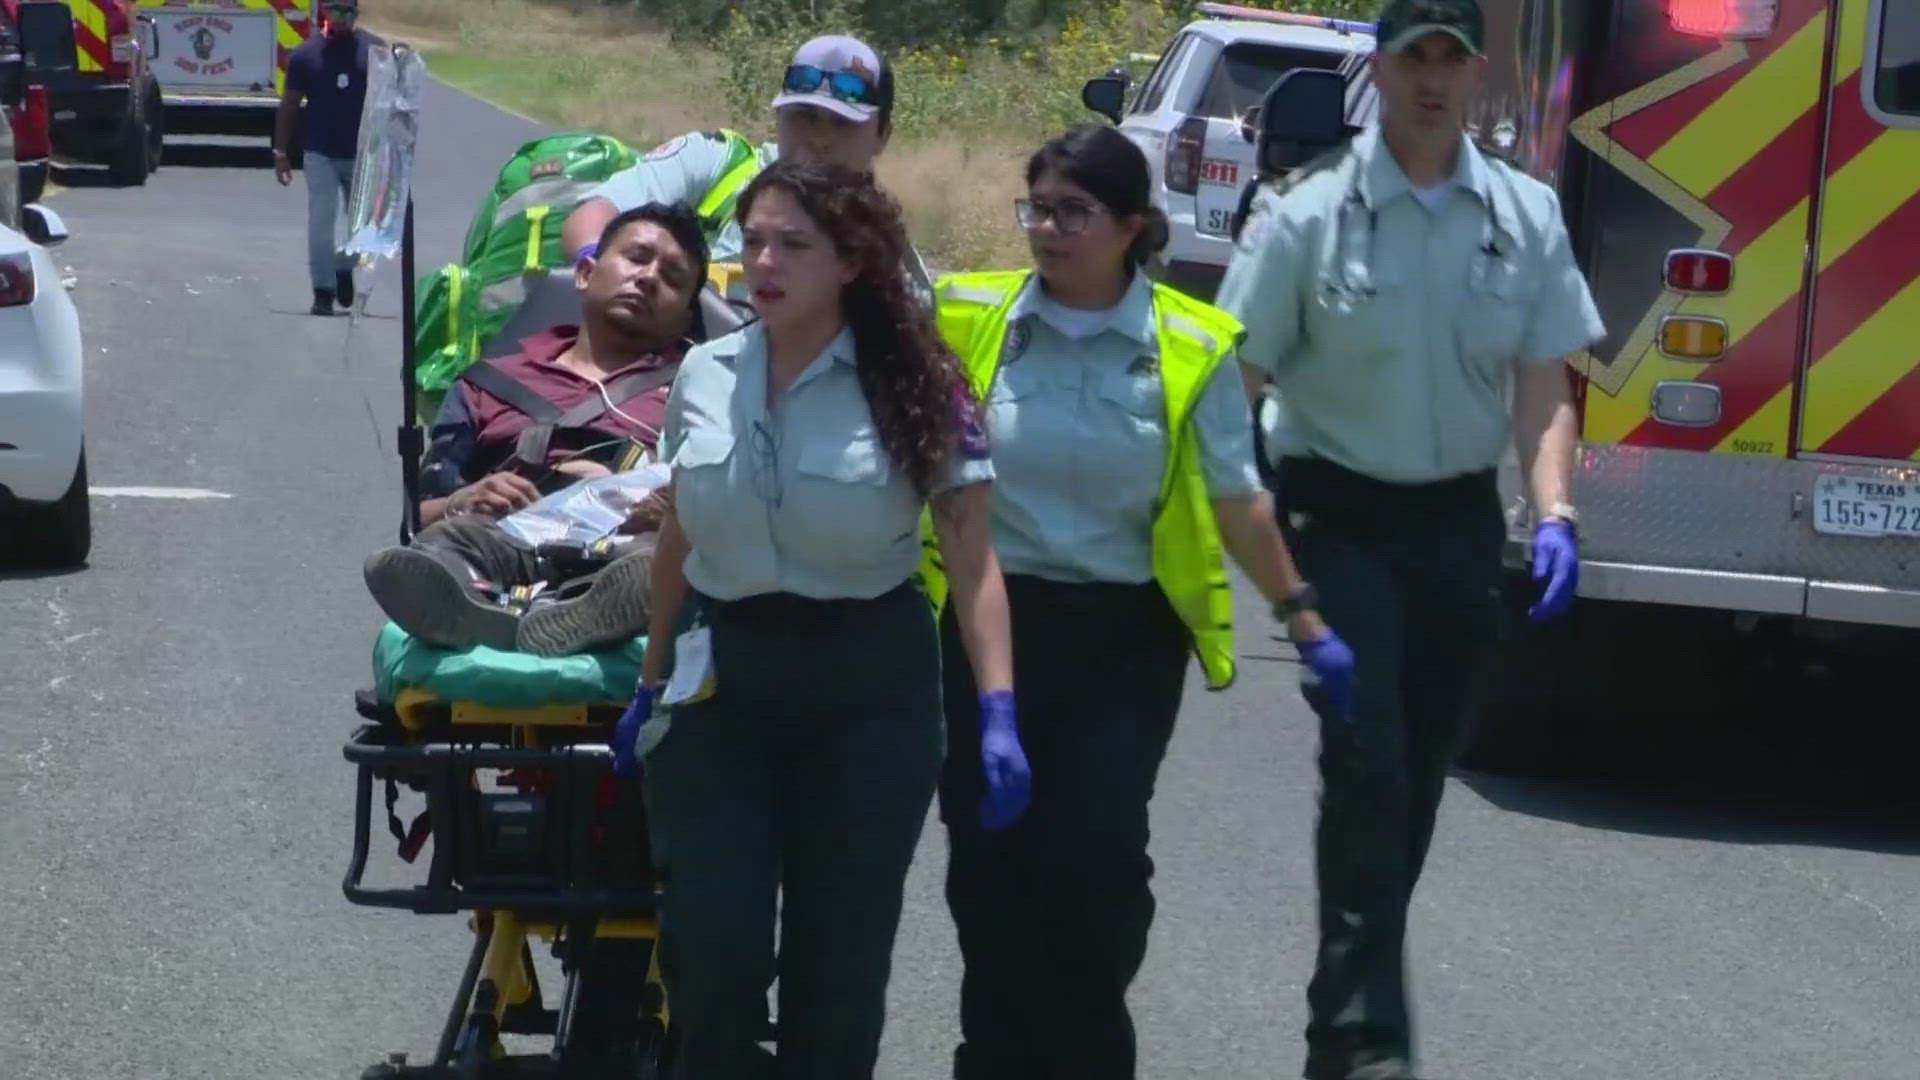 12 hospitalized after officials rescue migrants from gooseneck trailer in Bexar County